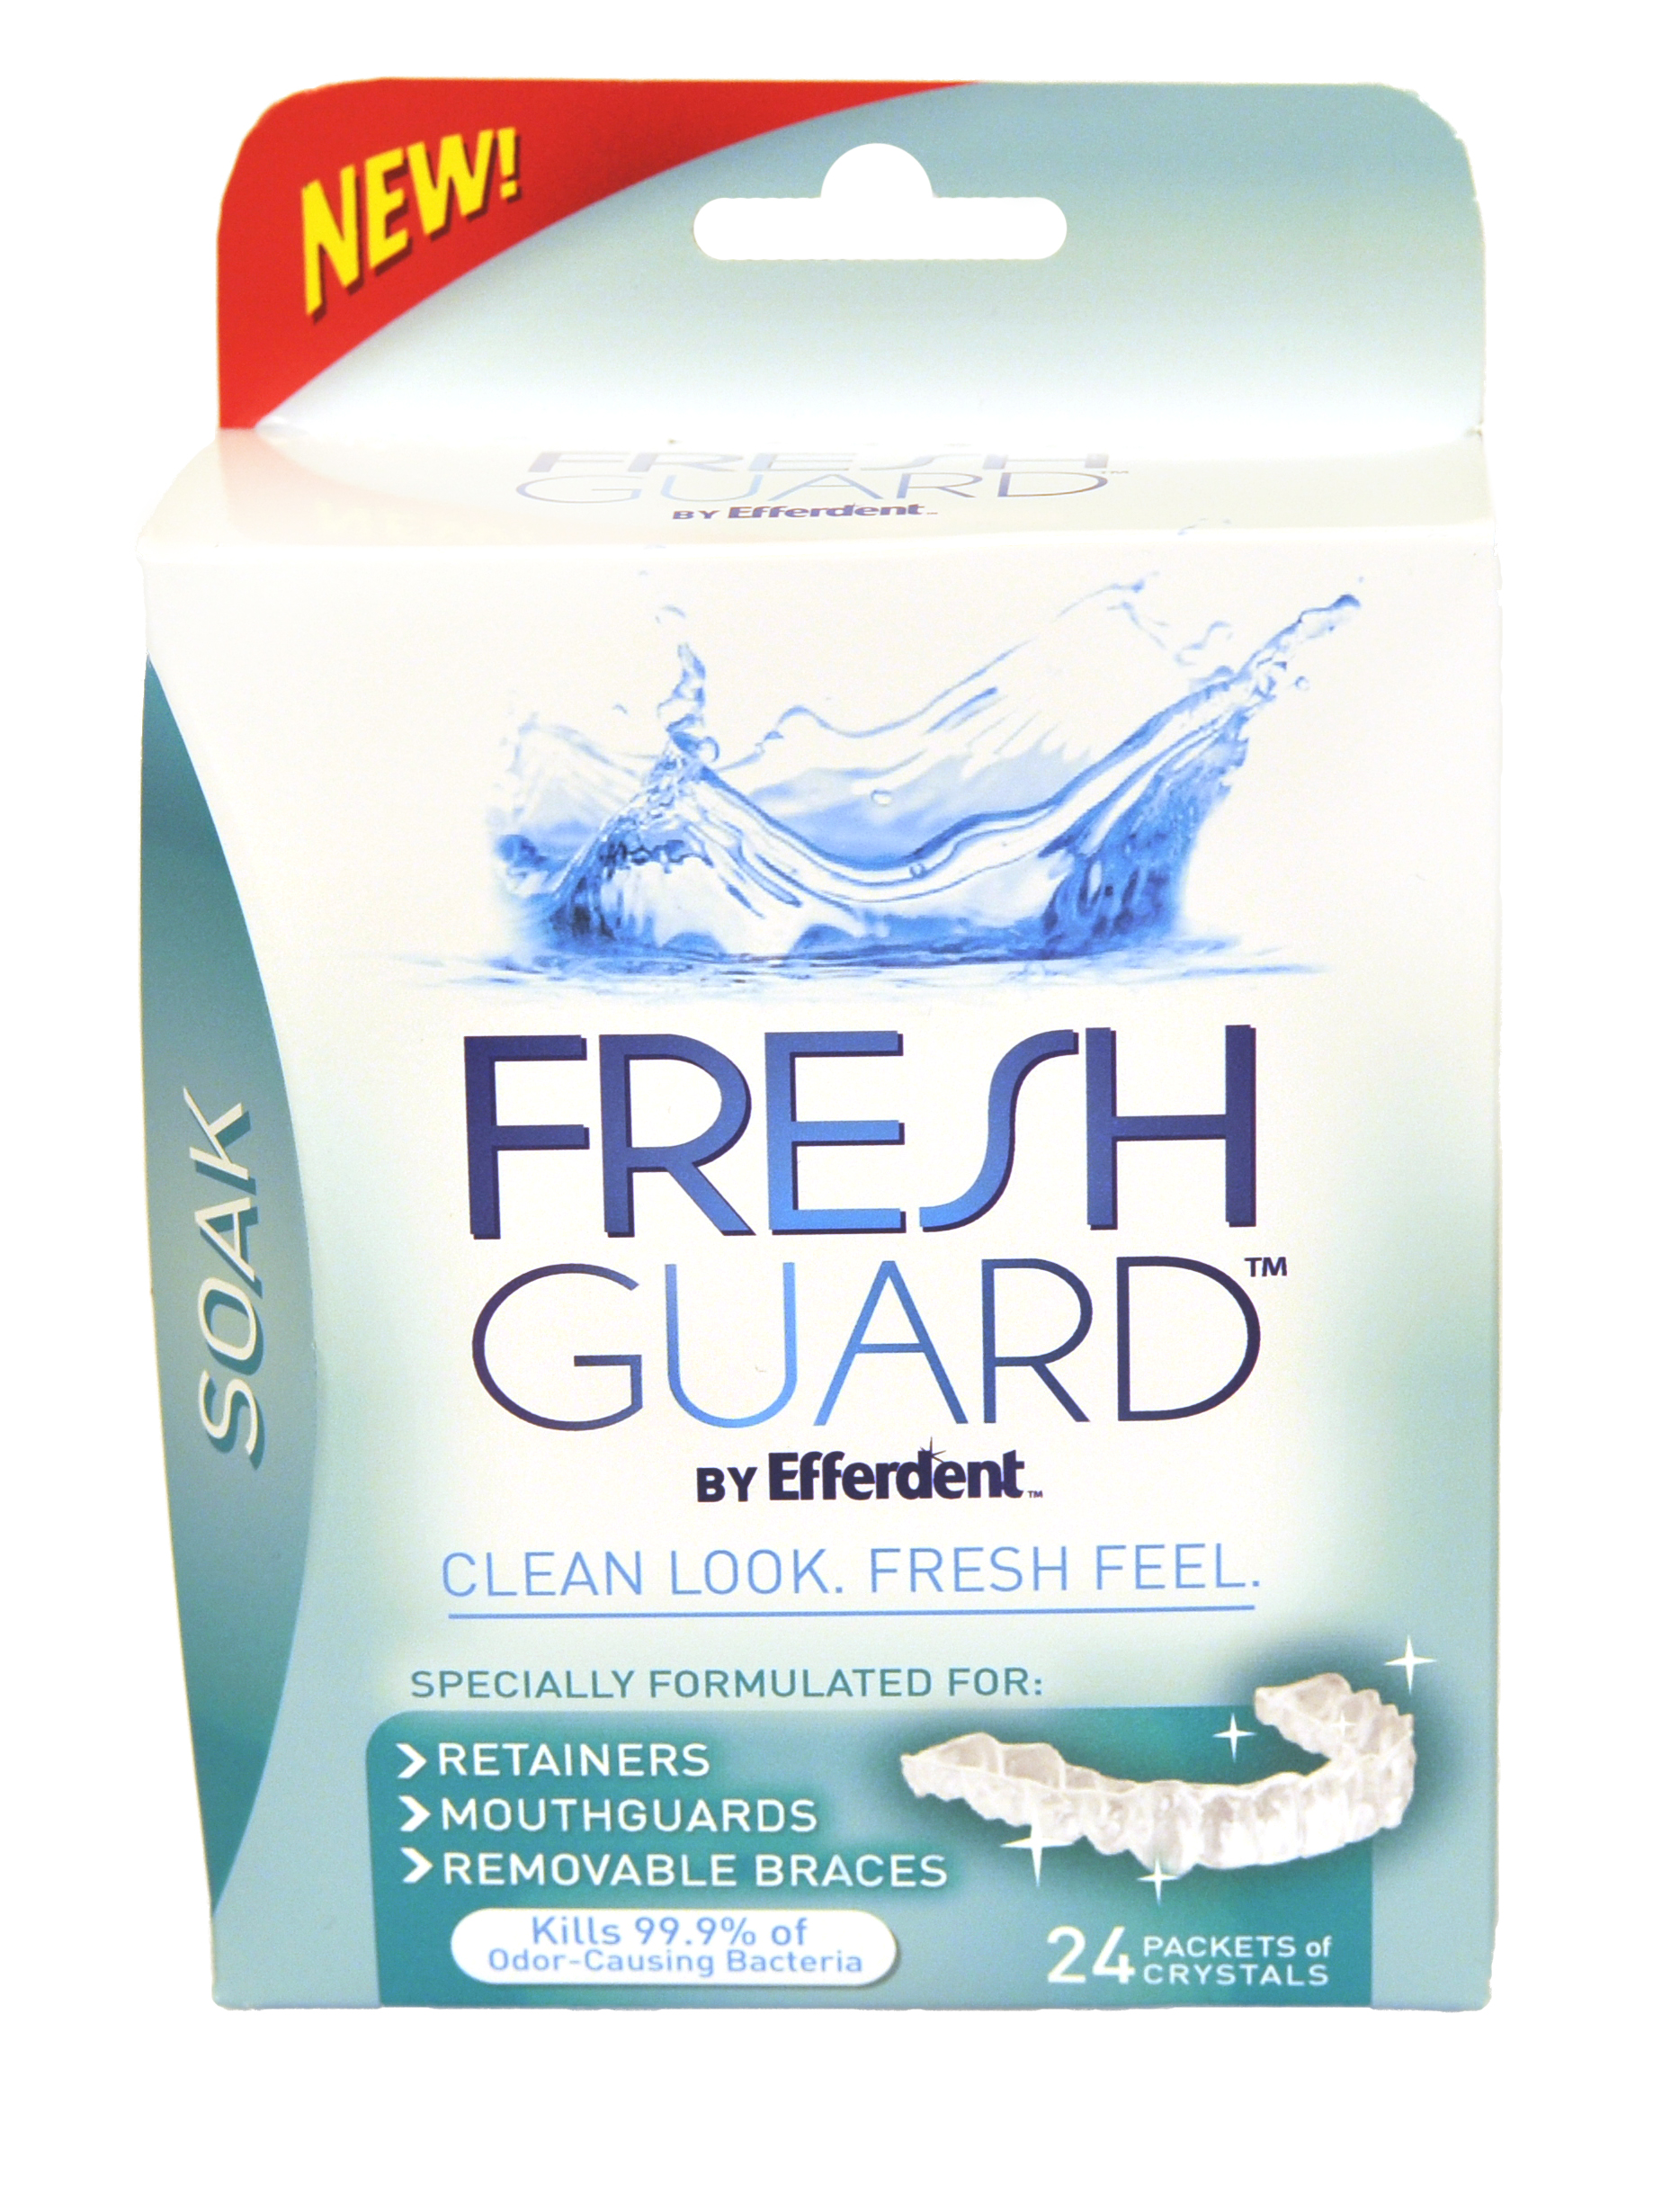 Specially Formulated for Retainers Mouthguards and Removable Braces  24 ct